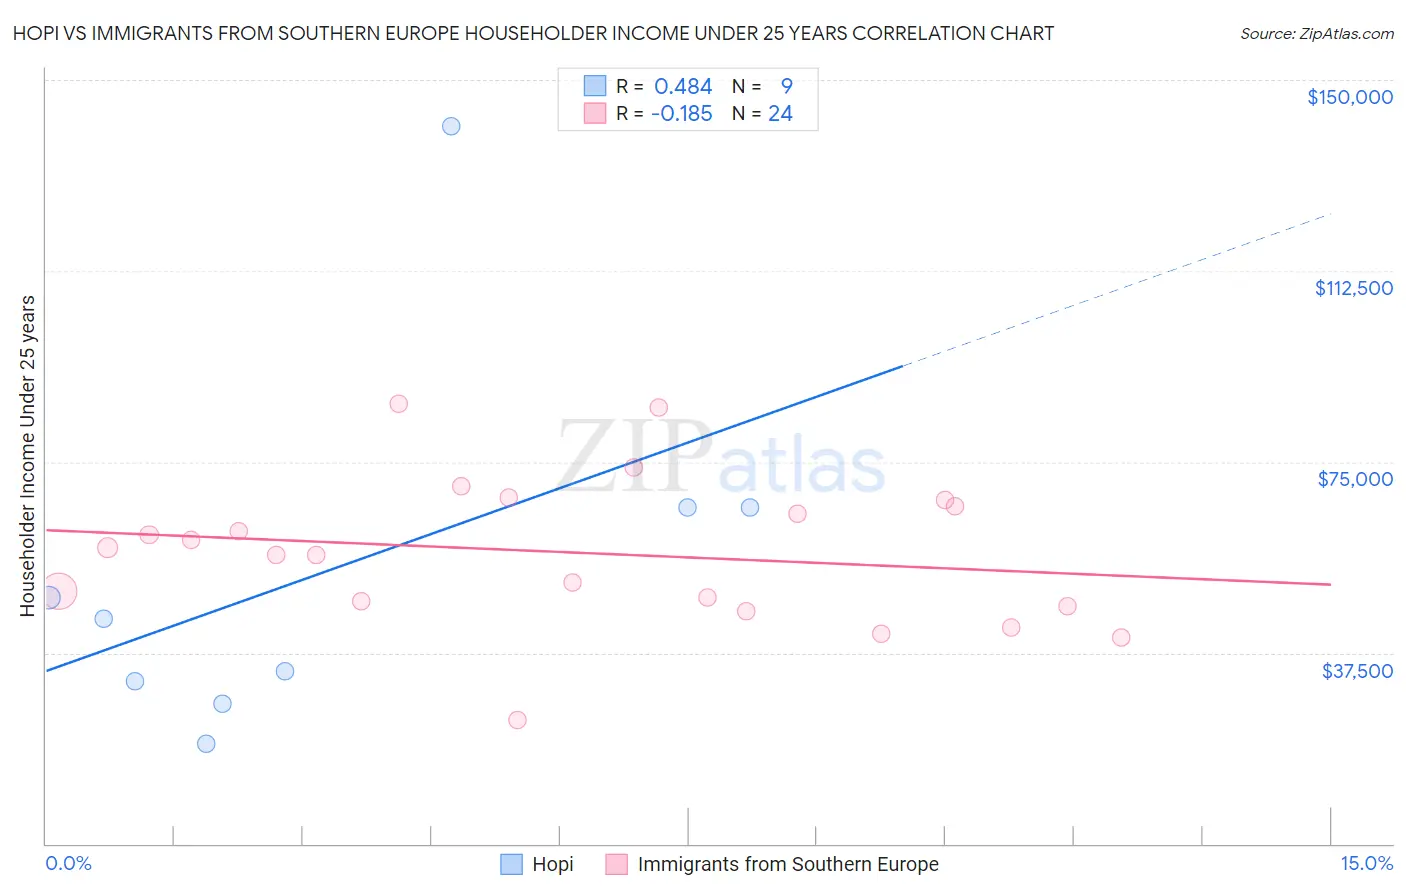 Hopi vs Immigrants from Southern Europe Householder Income Under 25 years